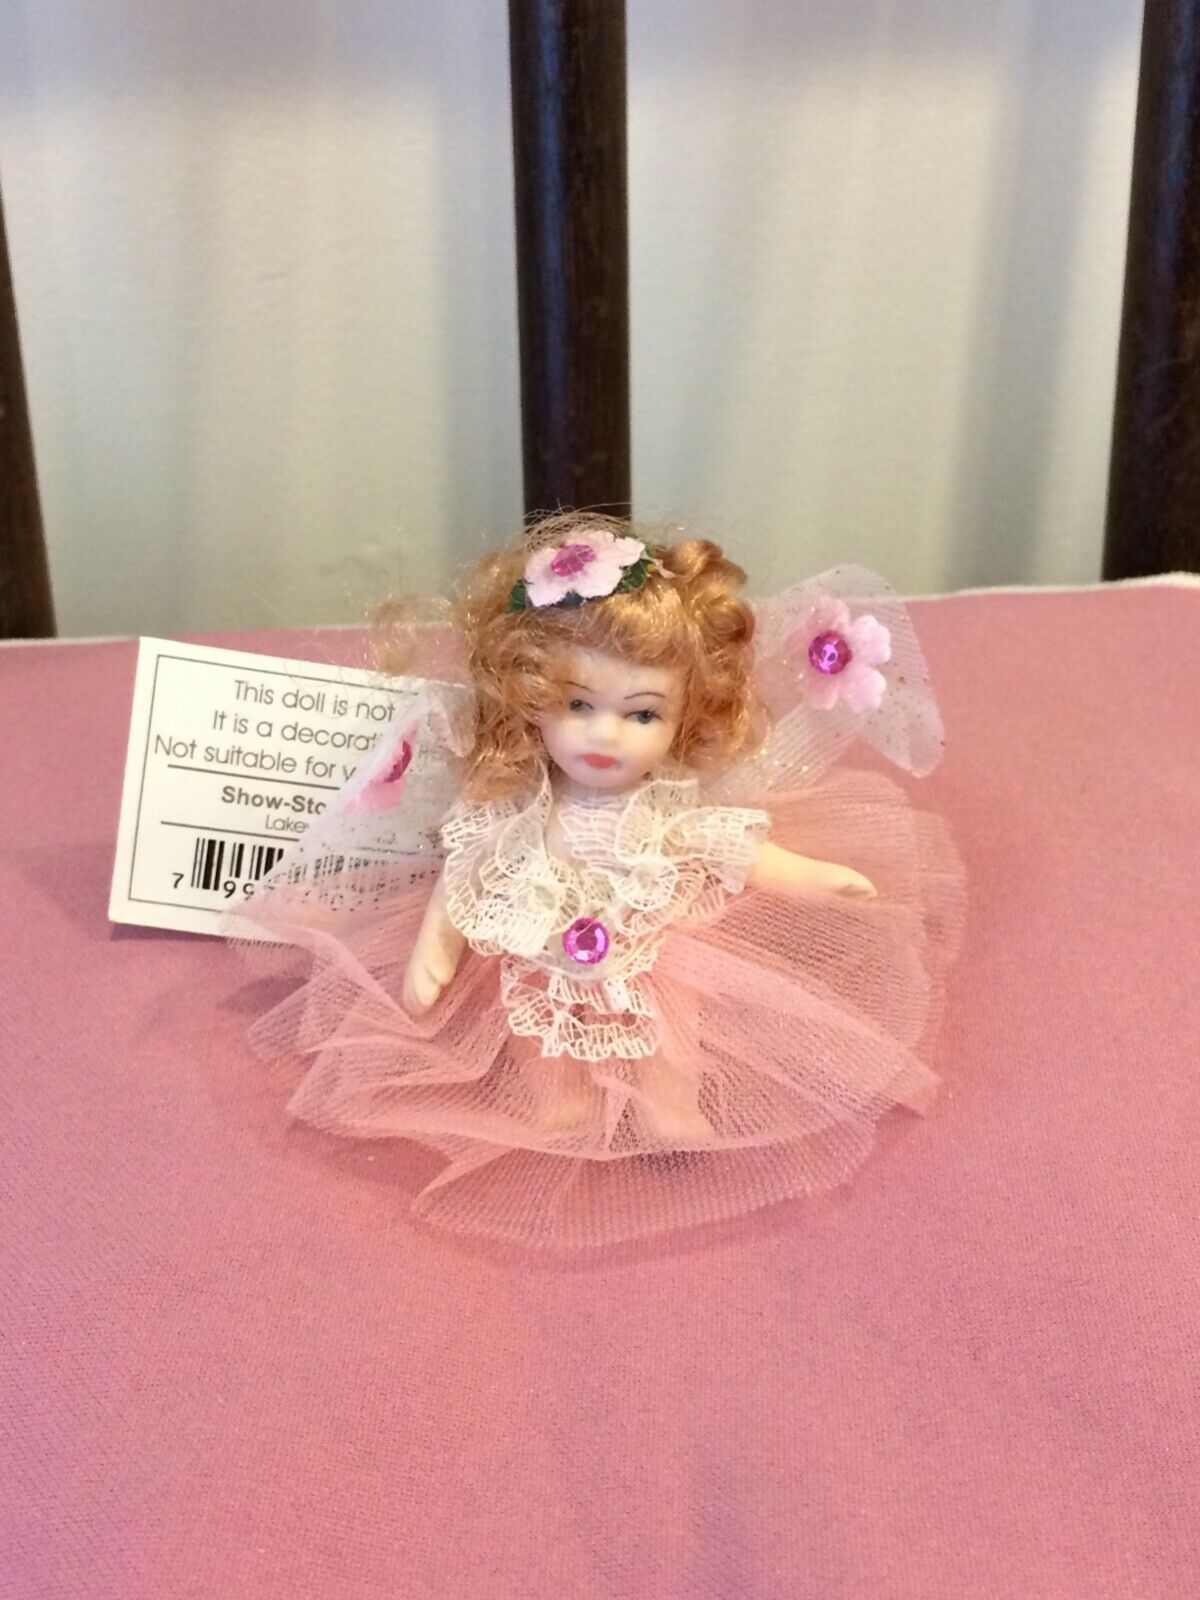 Collectible Porcelain Doll Ornament Gigi By Show-stoppers, Inc. Pink